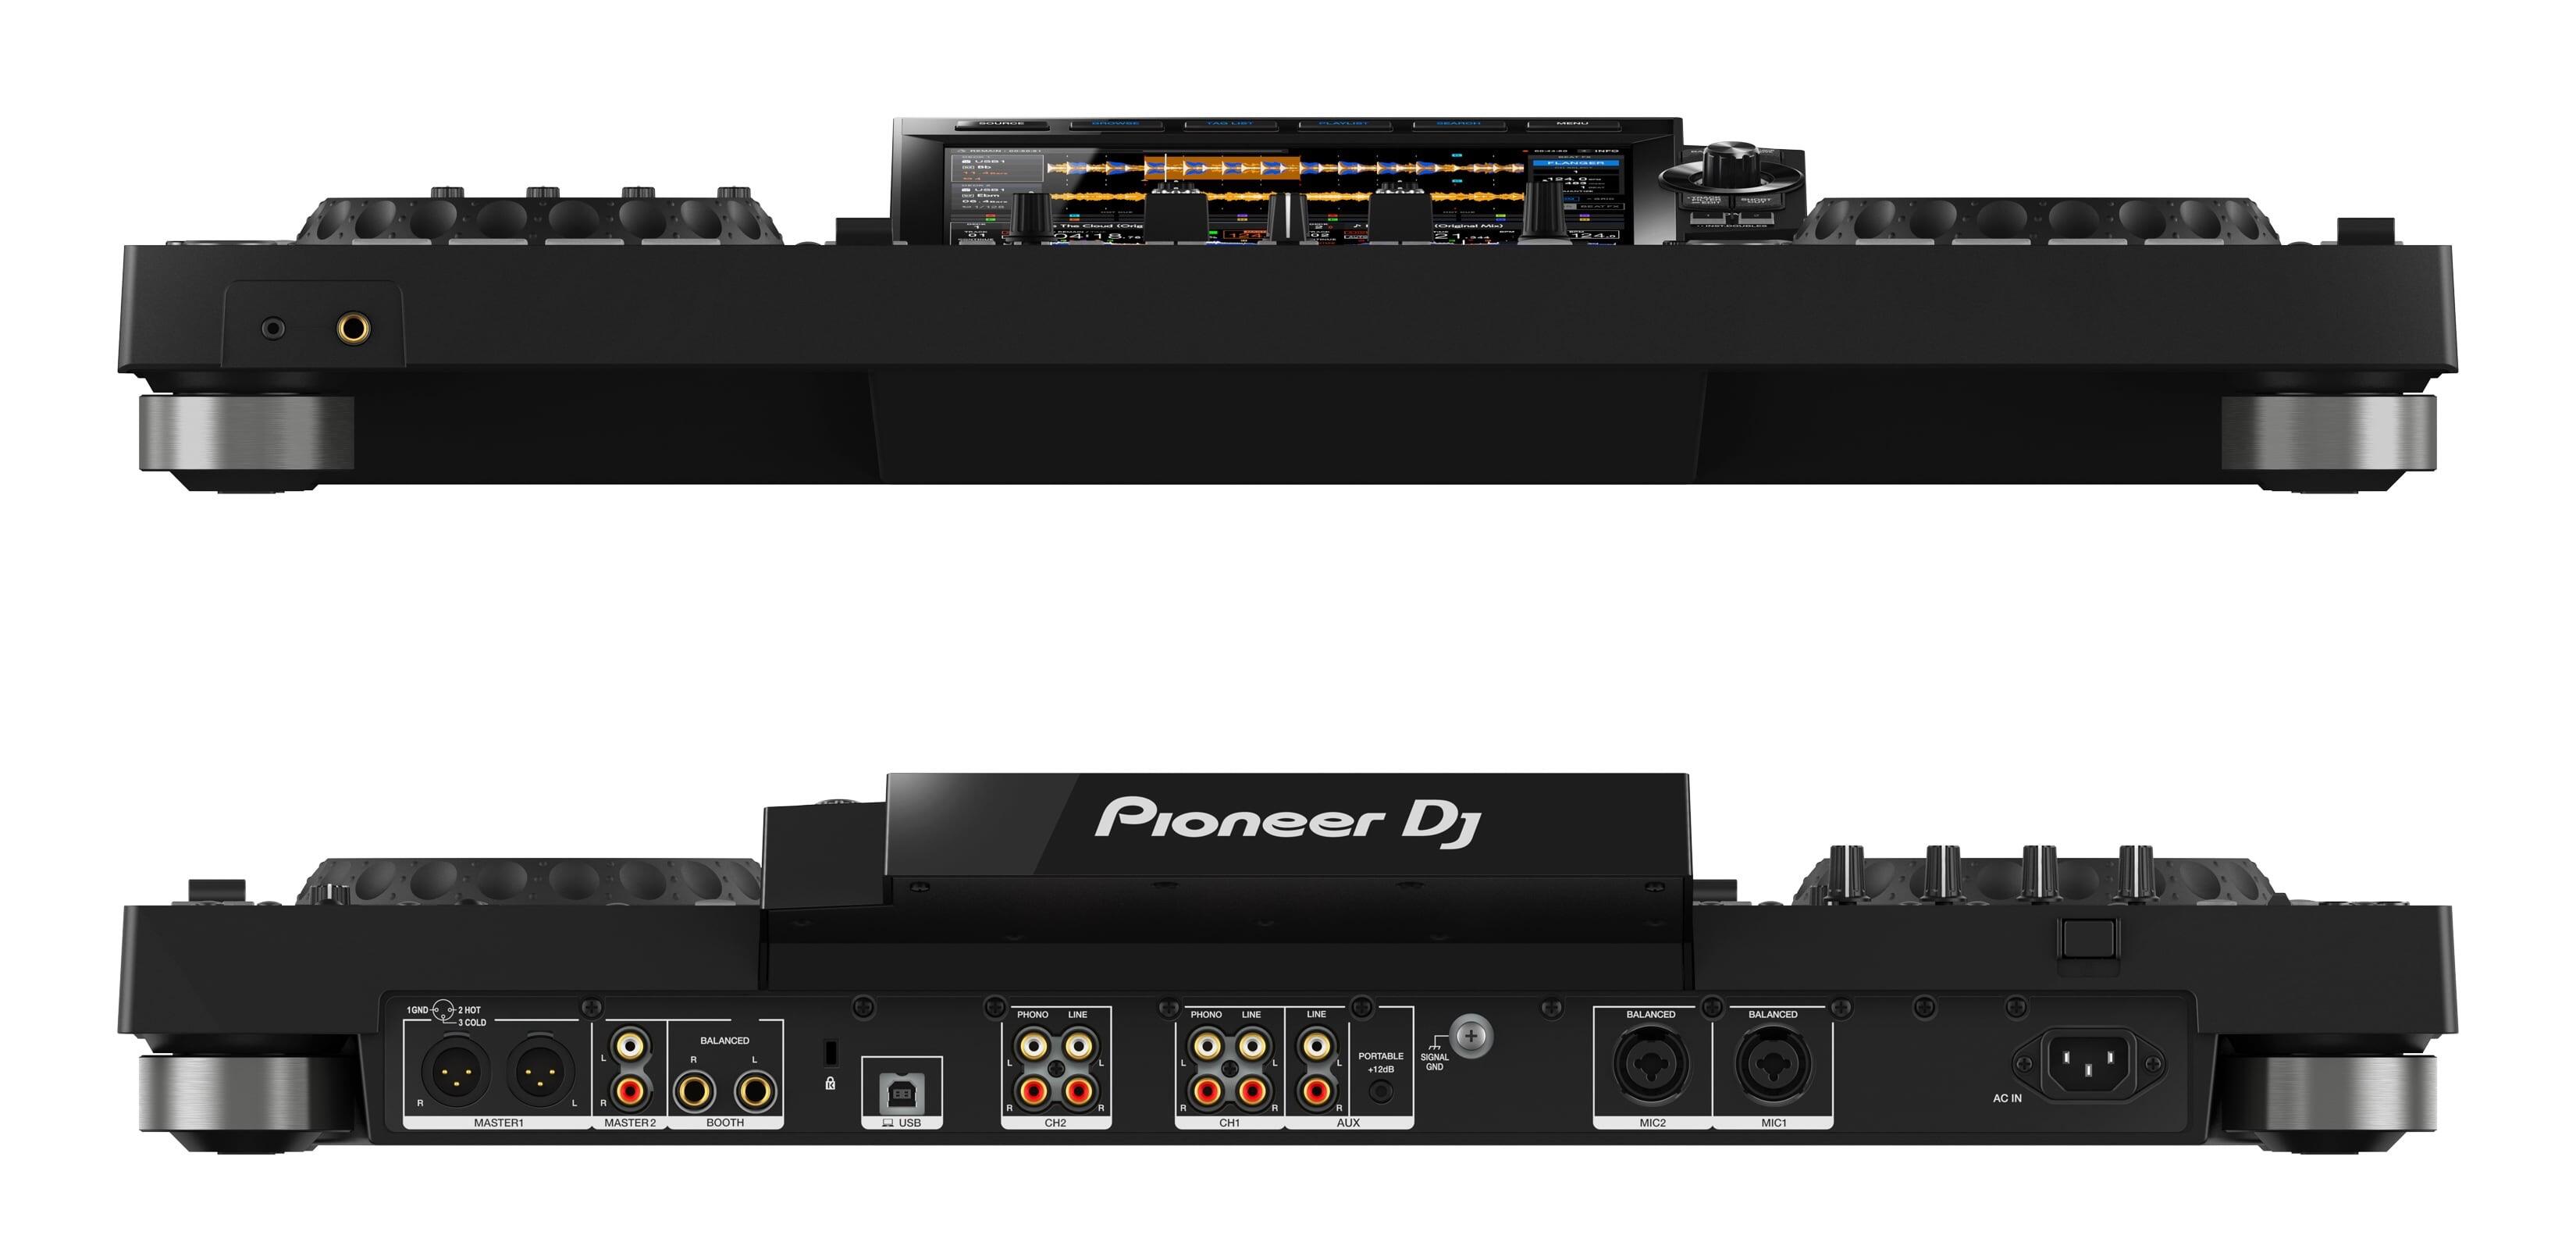 Pioneer DJ XDJ-RX3 front and rear